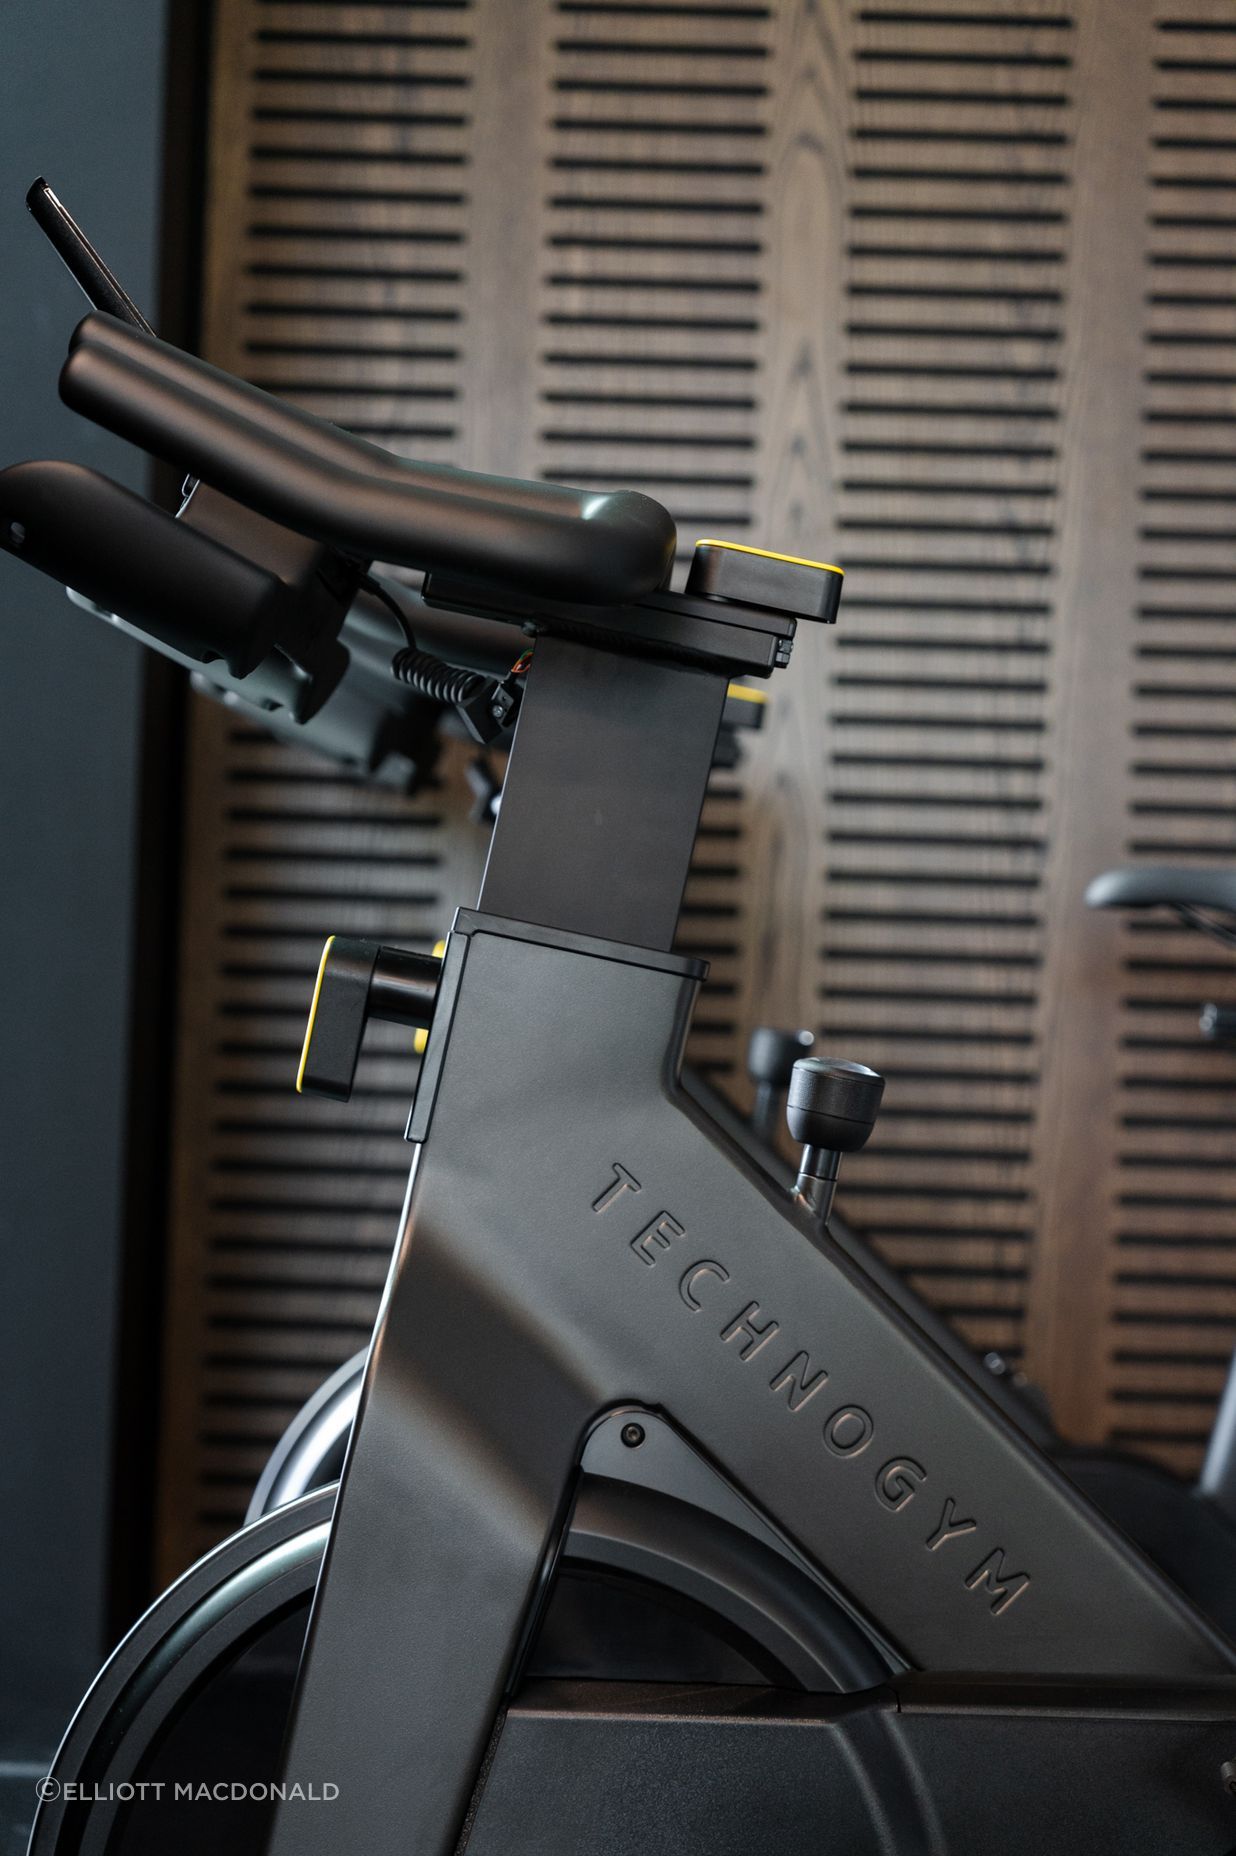 Technogym's Group Cycle Connect Spin Bike is a compact design that can fit easily into any space.